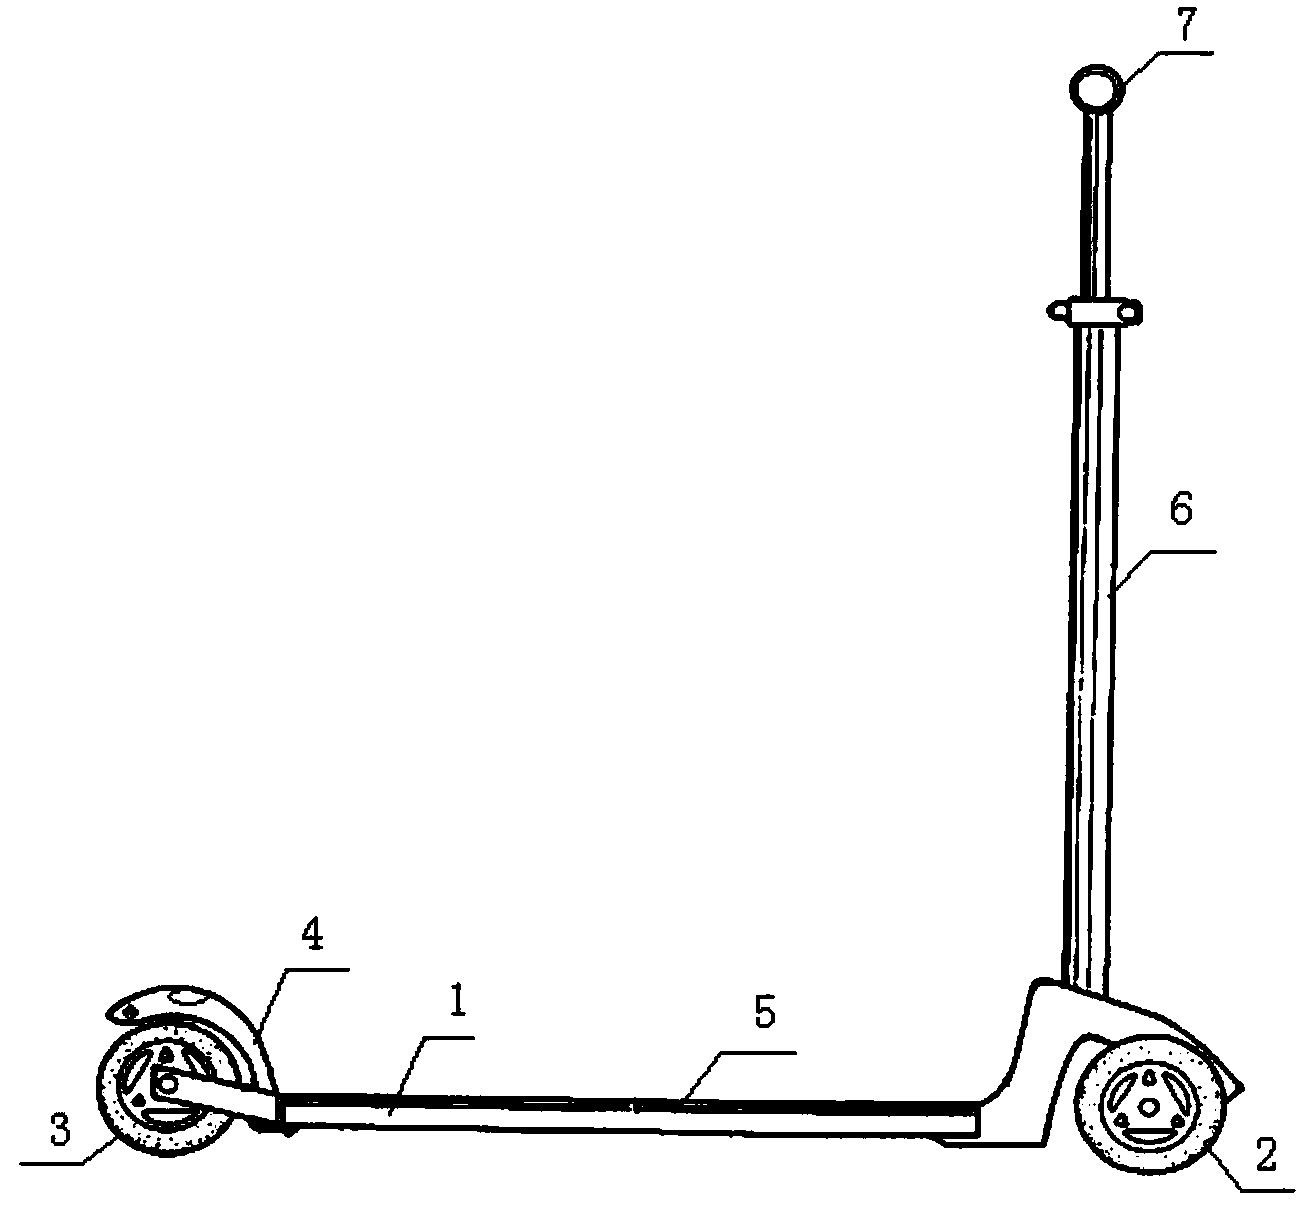 Scooter with LED lamp